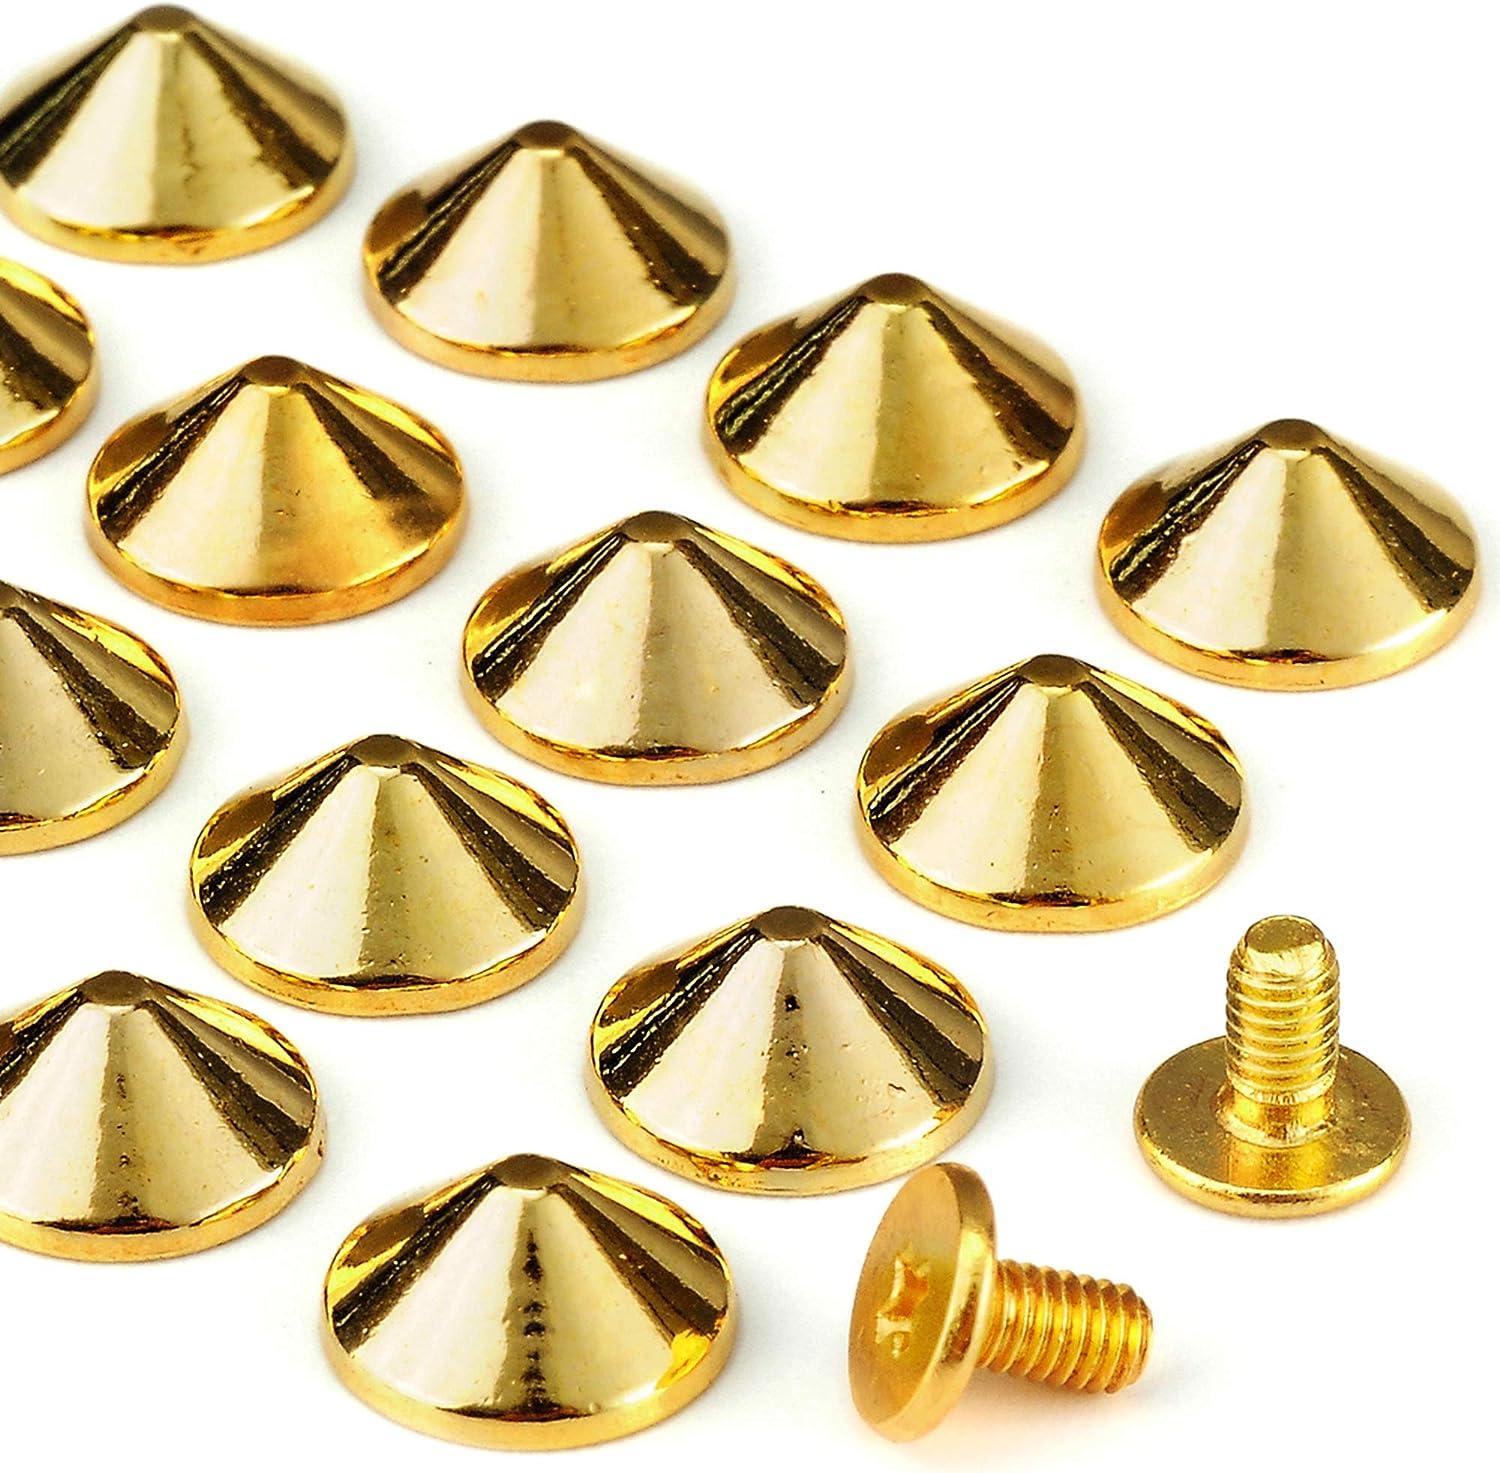 BUYGOO 50 Sets Cone Spikes Screwback Studs, Gold Studs and Spikes Punk  Spikes for DIY Leather Crafts and Clothing (10 X 29mm)